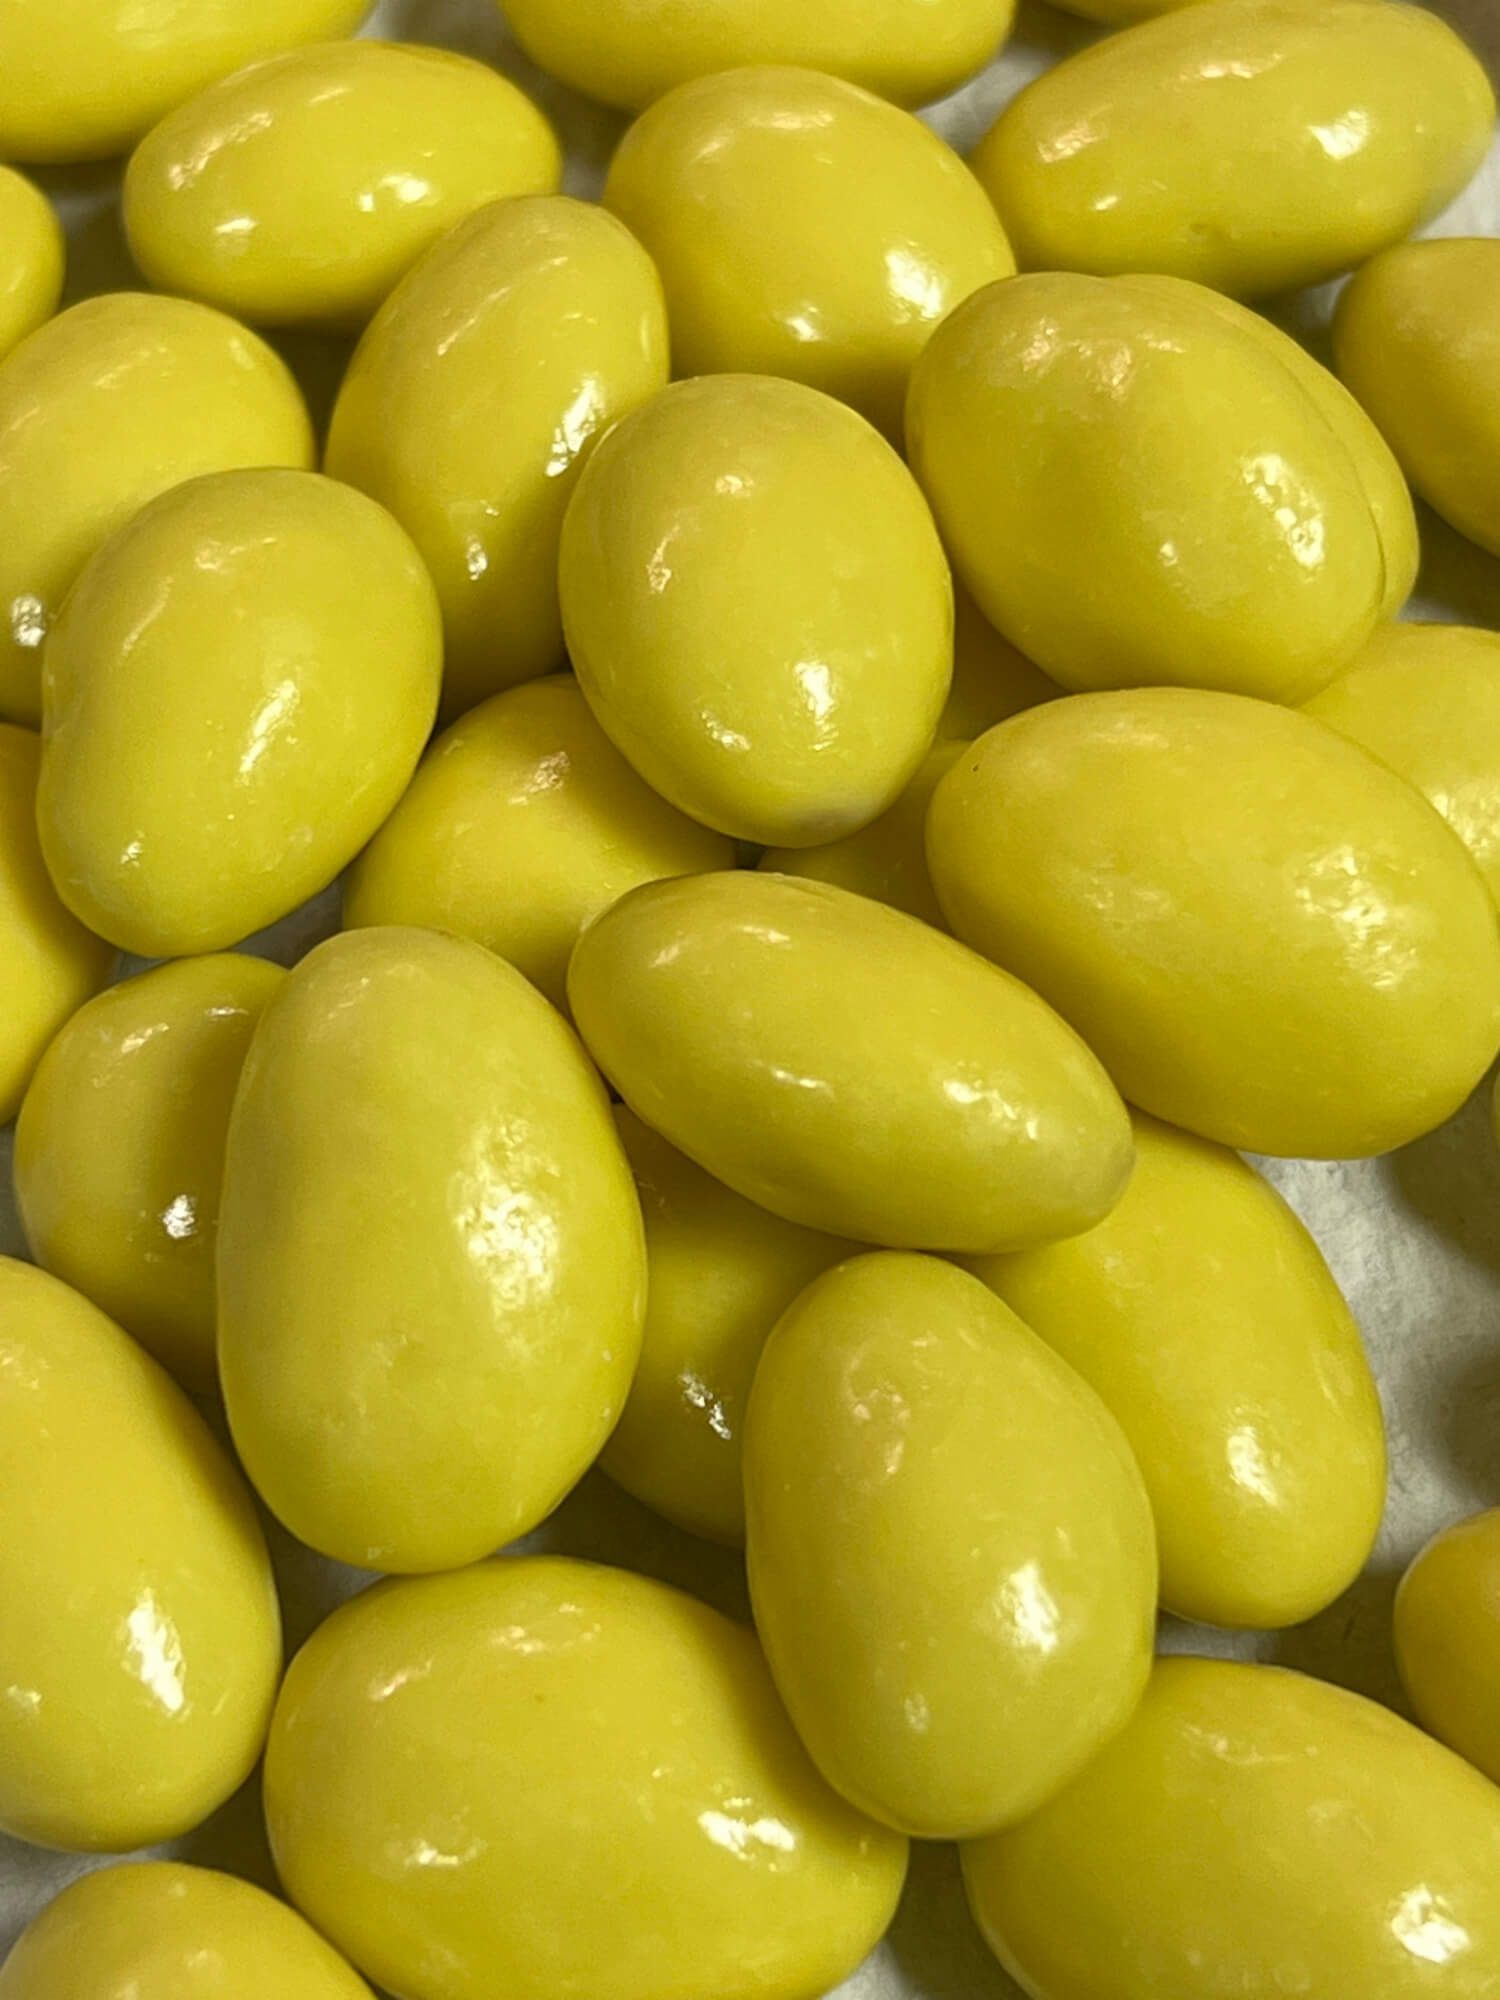 A close up of a pile of yellow almonds on a table.